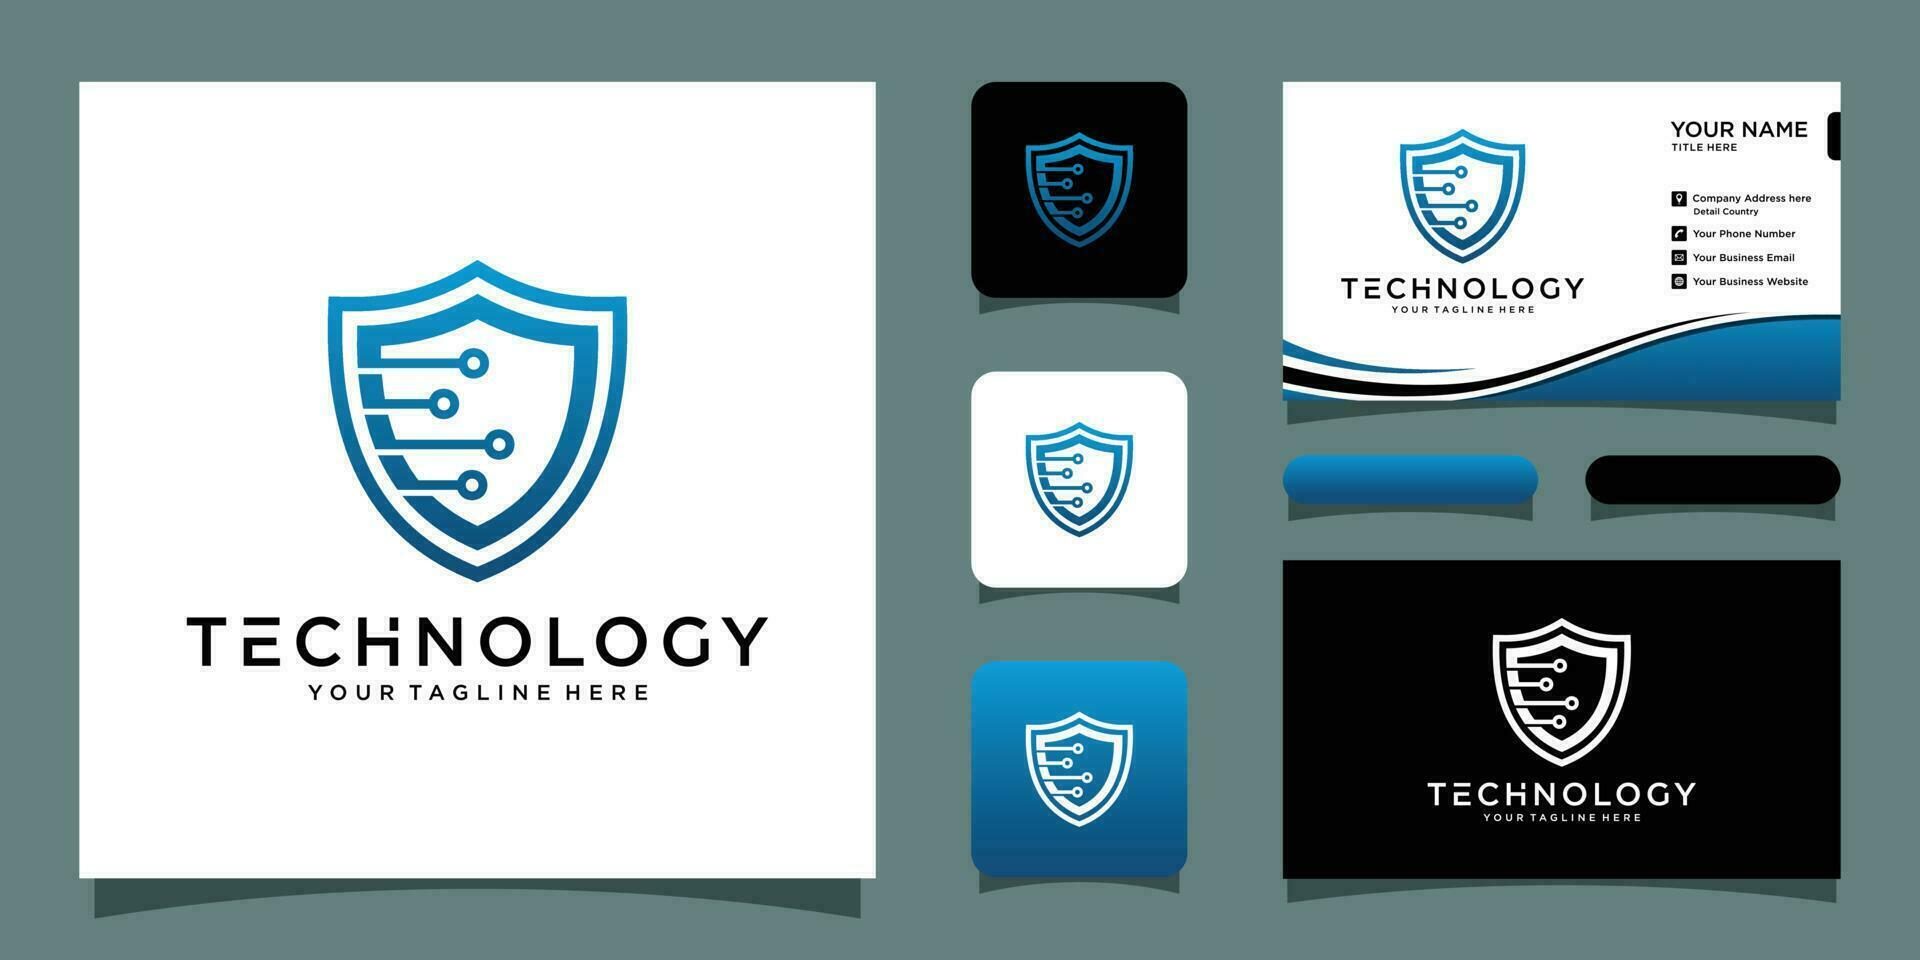 Security logo technology for your company, shield logo for security data and business card Premium Vector